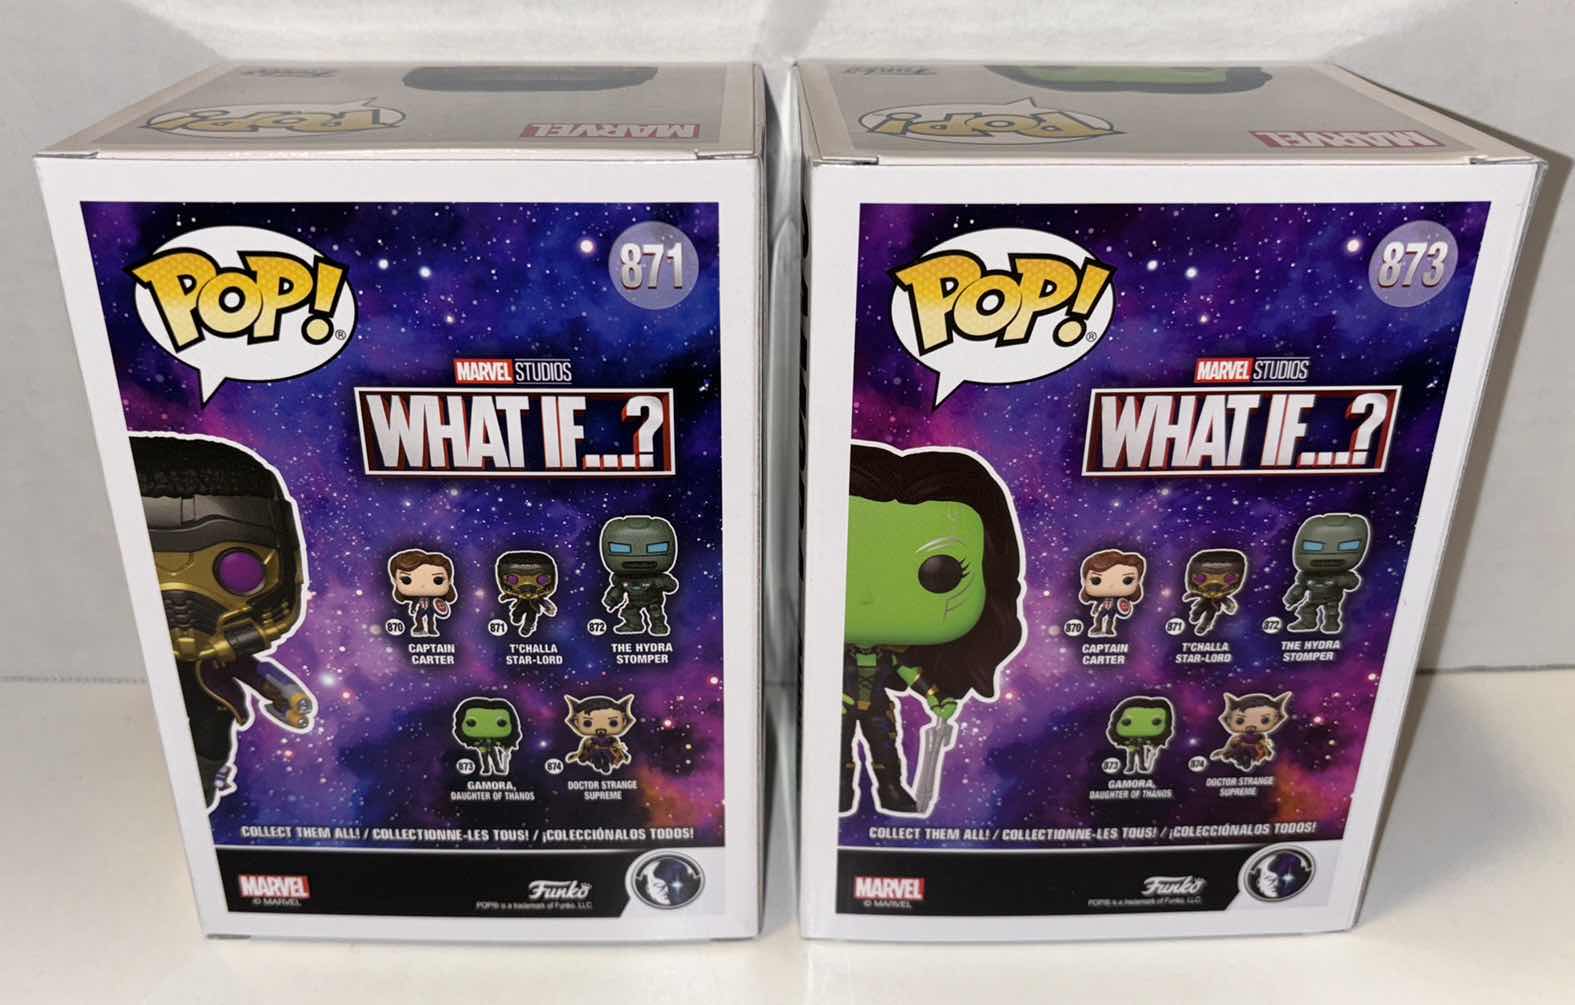 Photo 4 of NEW FUNKO POP! BOBBLE-HEAD VINYL FIGURE, 2-PACK MARVEL STUDIOS WHAT IF…? #871 T’CHALLA STAR-LORD & #873 GAMORA DAUGHTER OF THANOS